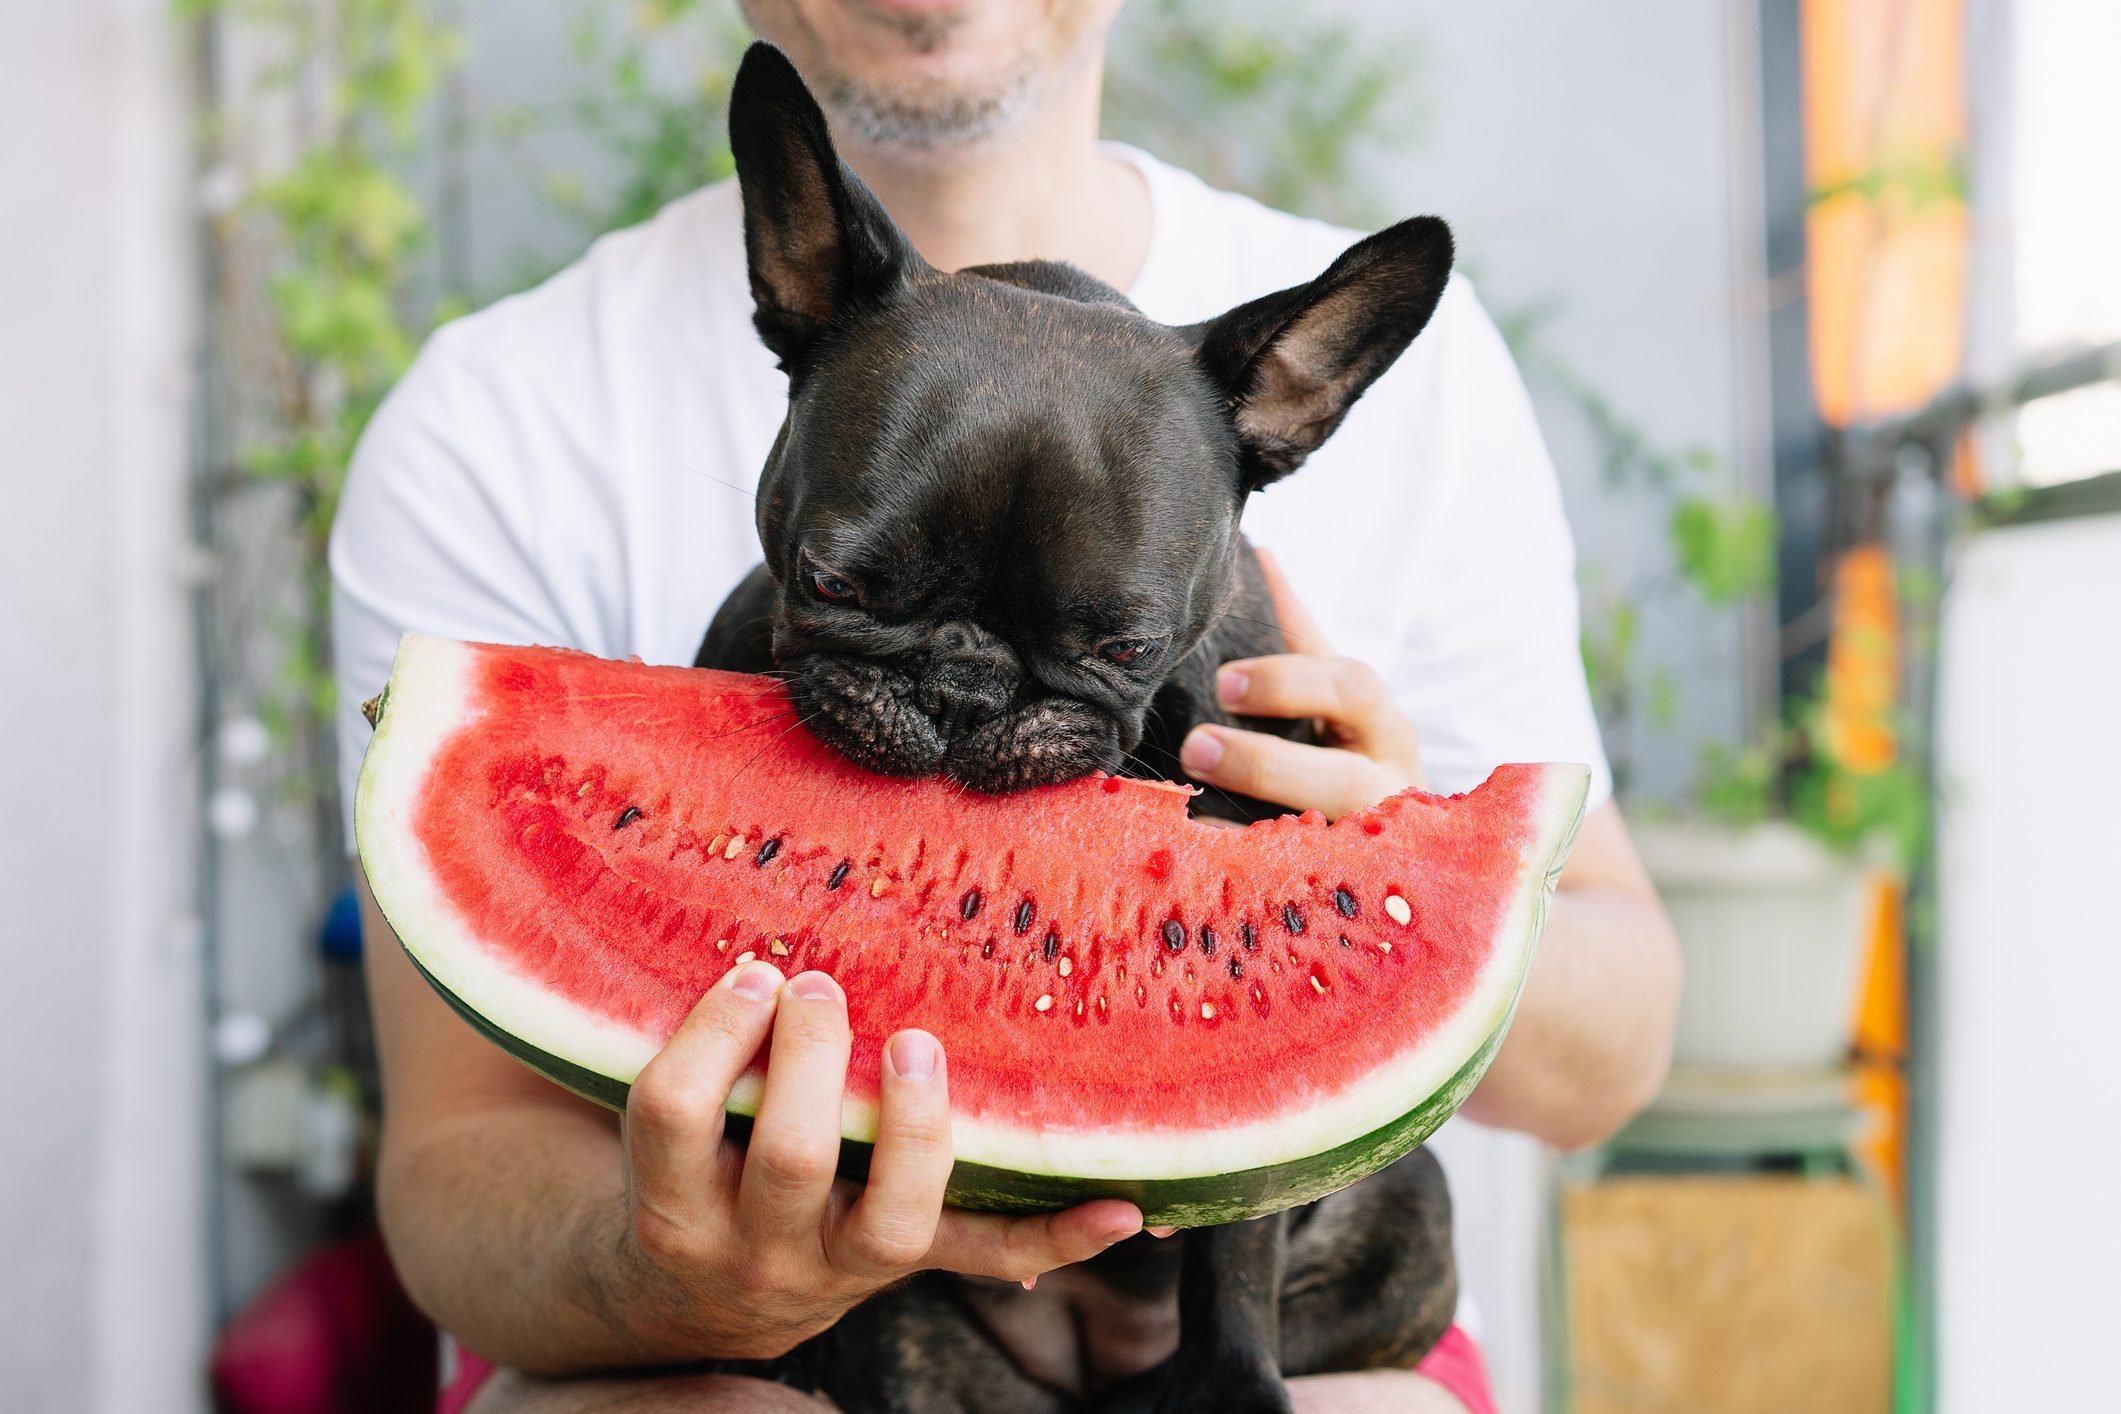 Human Foods Dogs Can, Can't Eat (From a Vet) - Pet News Daily